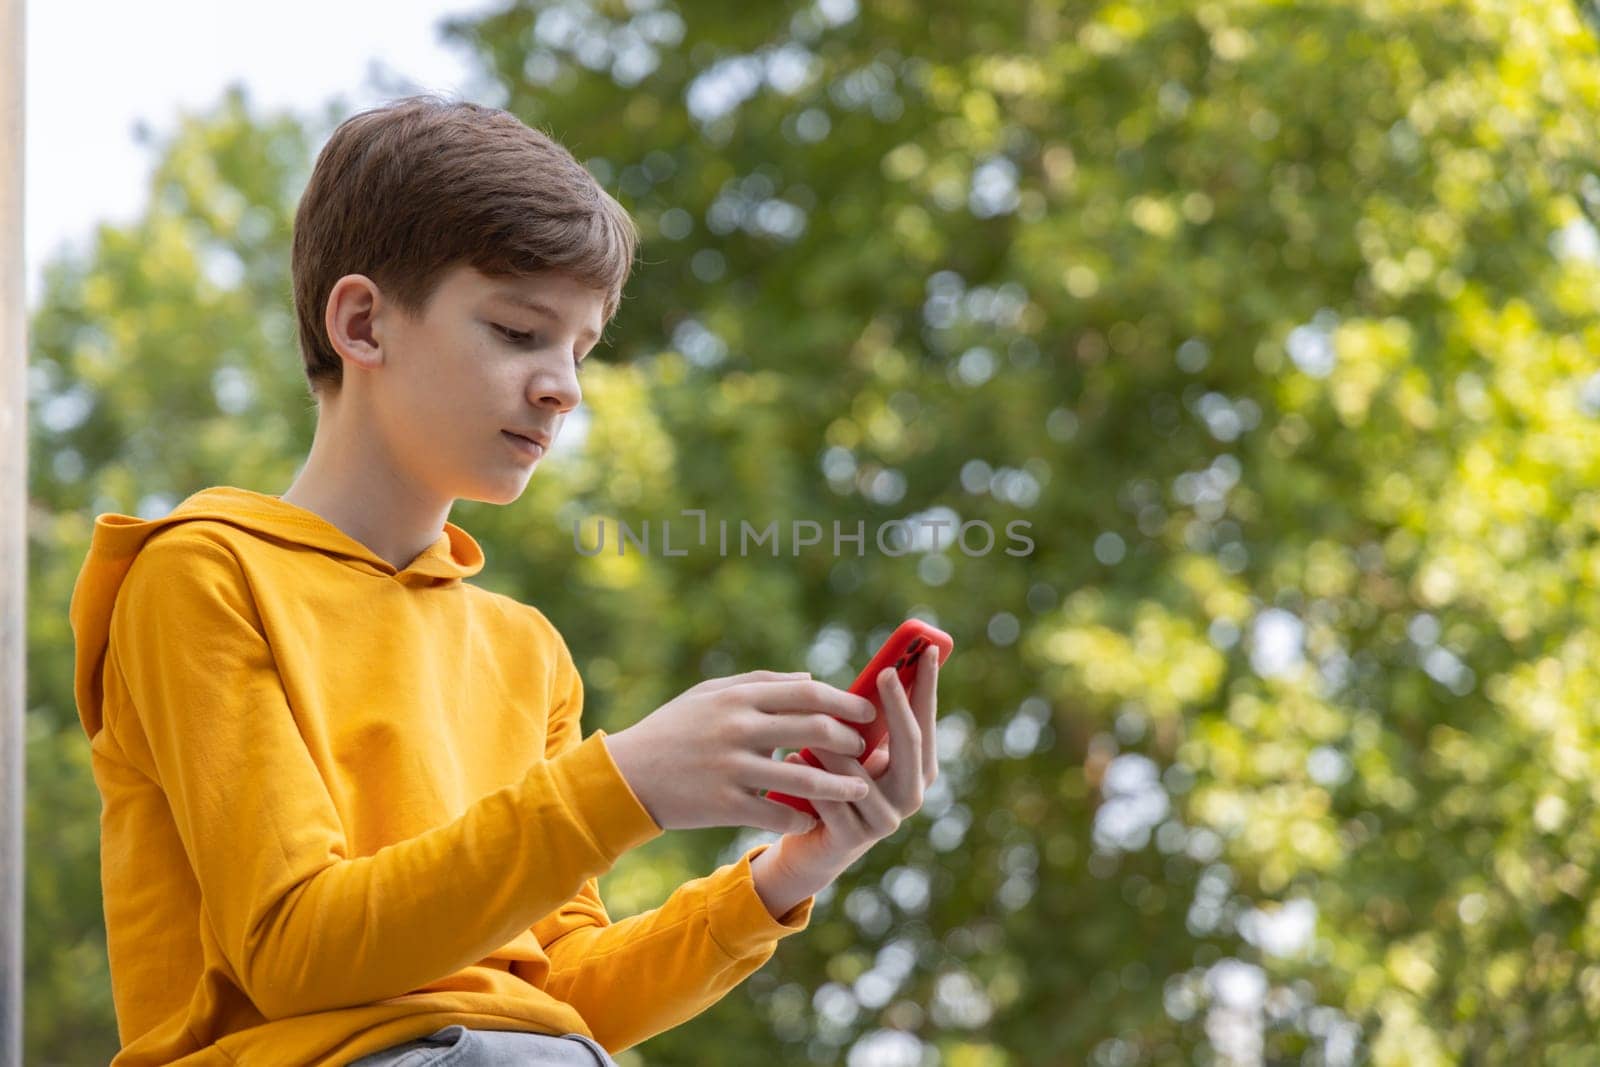 Streetstyle photo of young boy using smartphone. Communication on the go. Playing games. Gaming after school